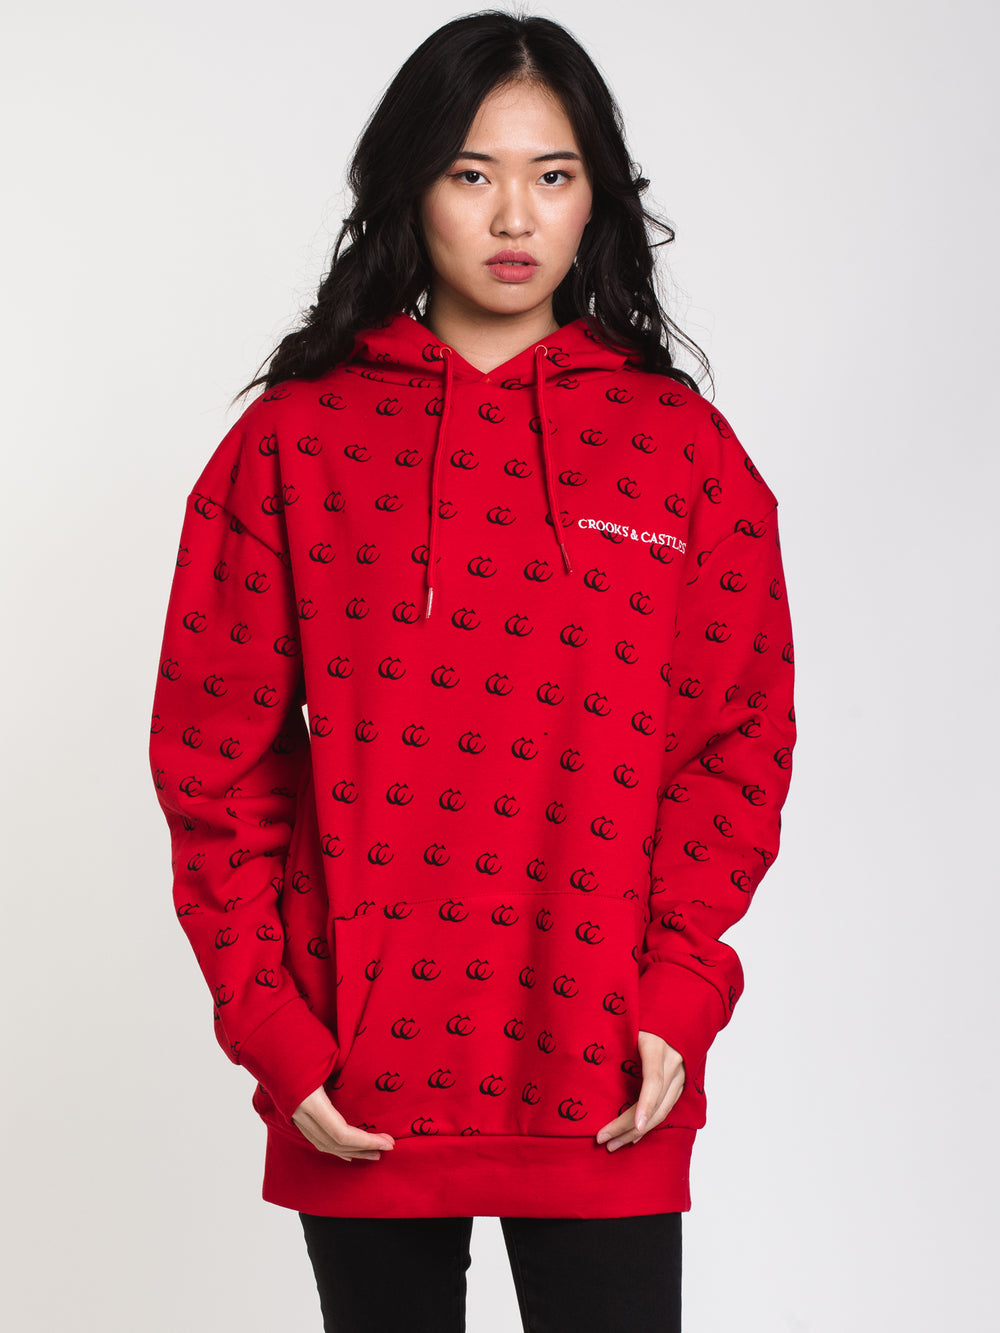 WOMENS C&C ALL OVER PRINT HOODIE FLEECE - RED - CLEARANCE